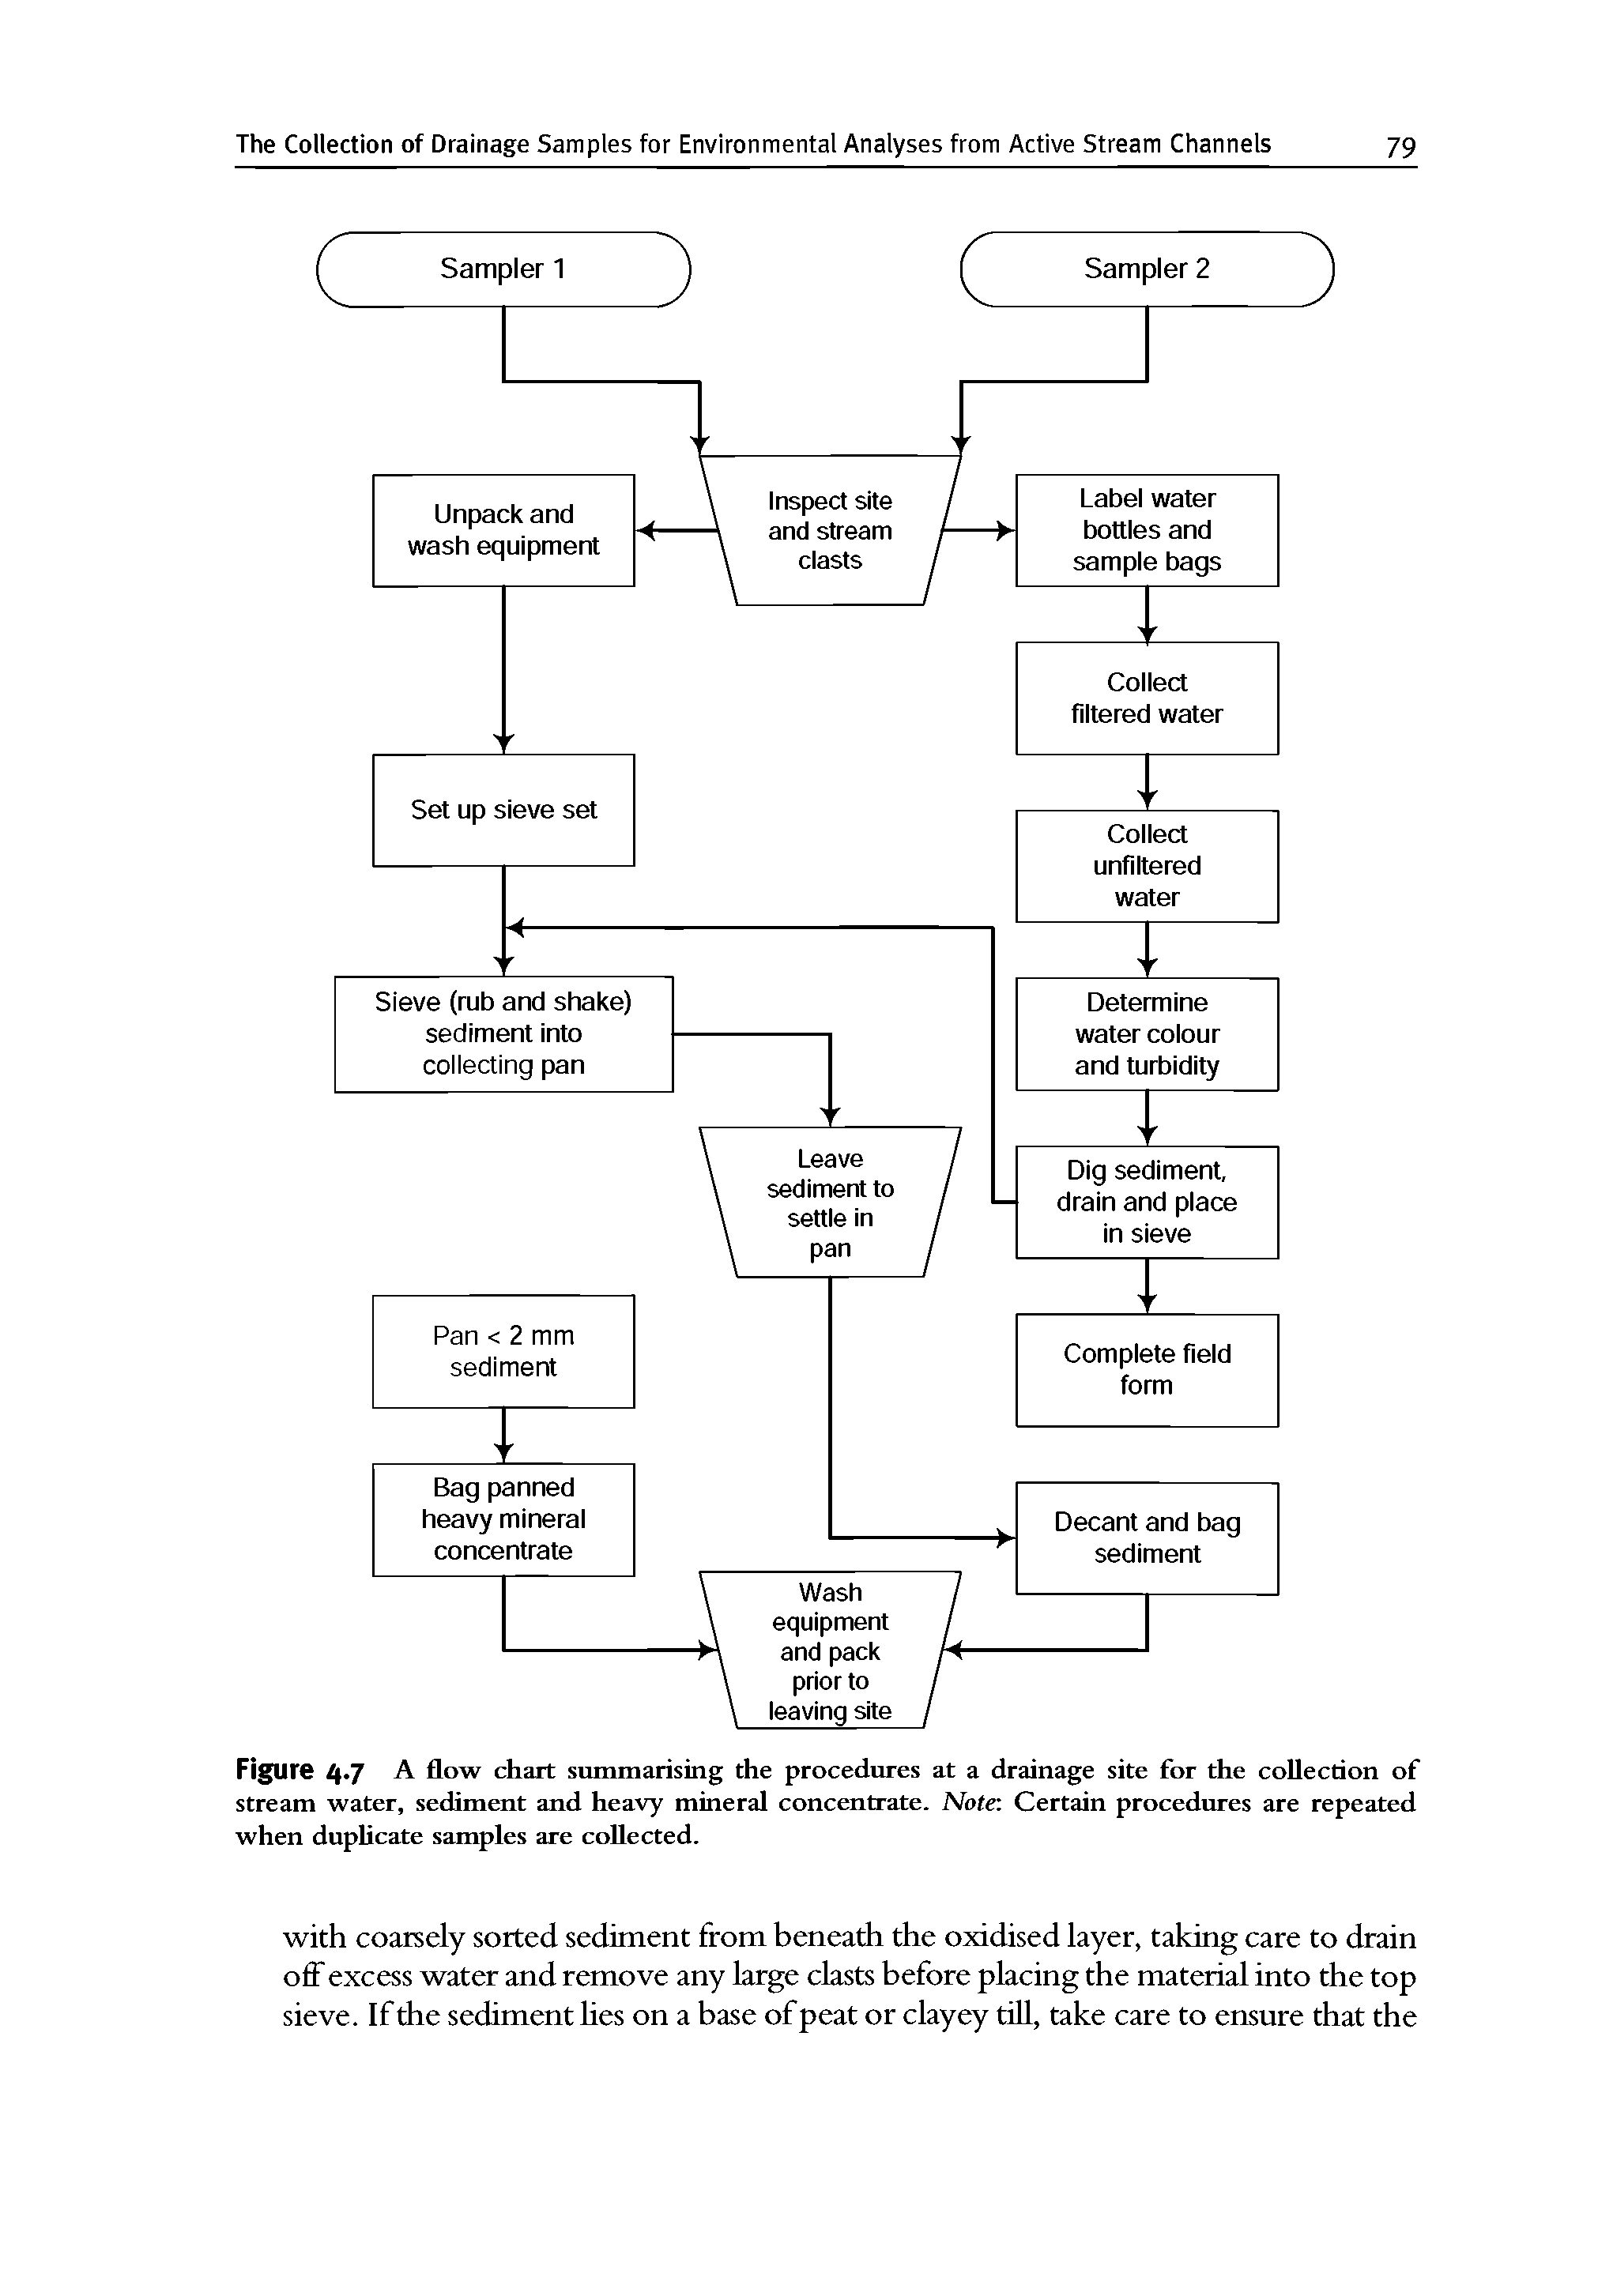 Figure 4.7 A flow chart summarising the procedures at a drainage site for the collection of stream water, sediment and heavy mineral concentrate. Note Certain procedures are repeated when duplicate samples are collected.